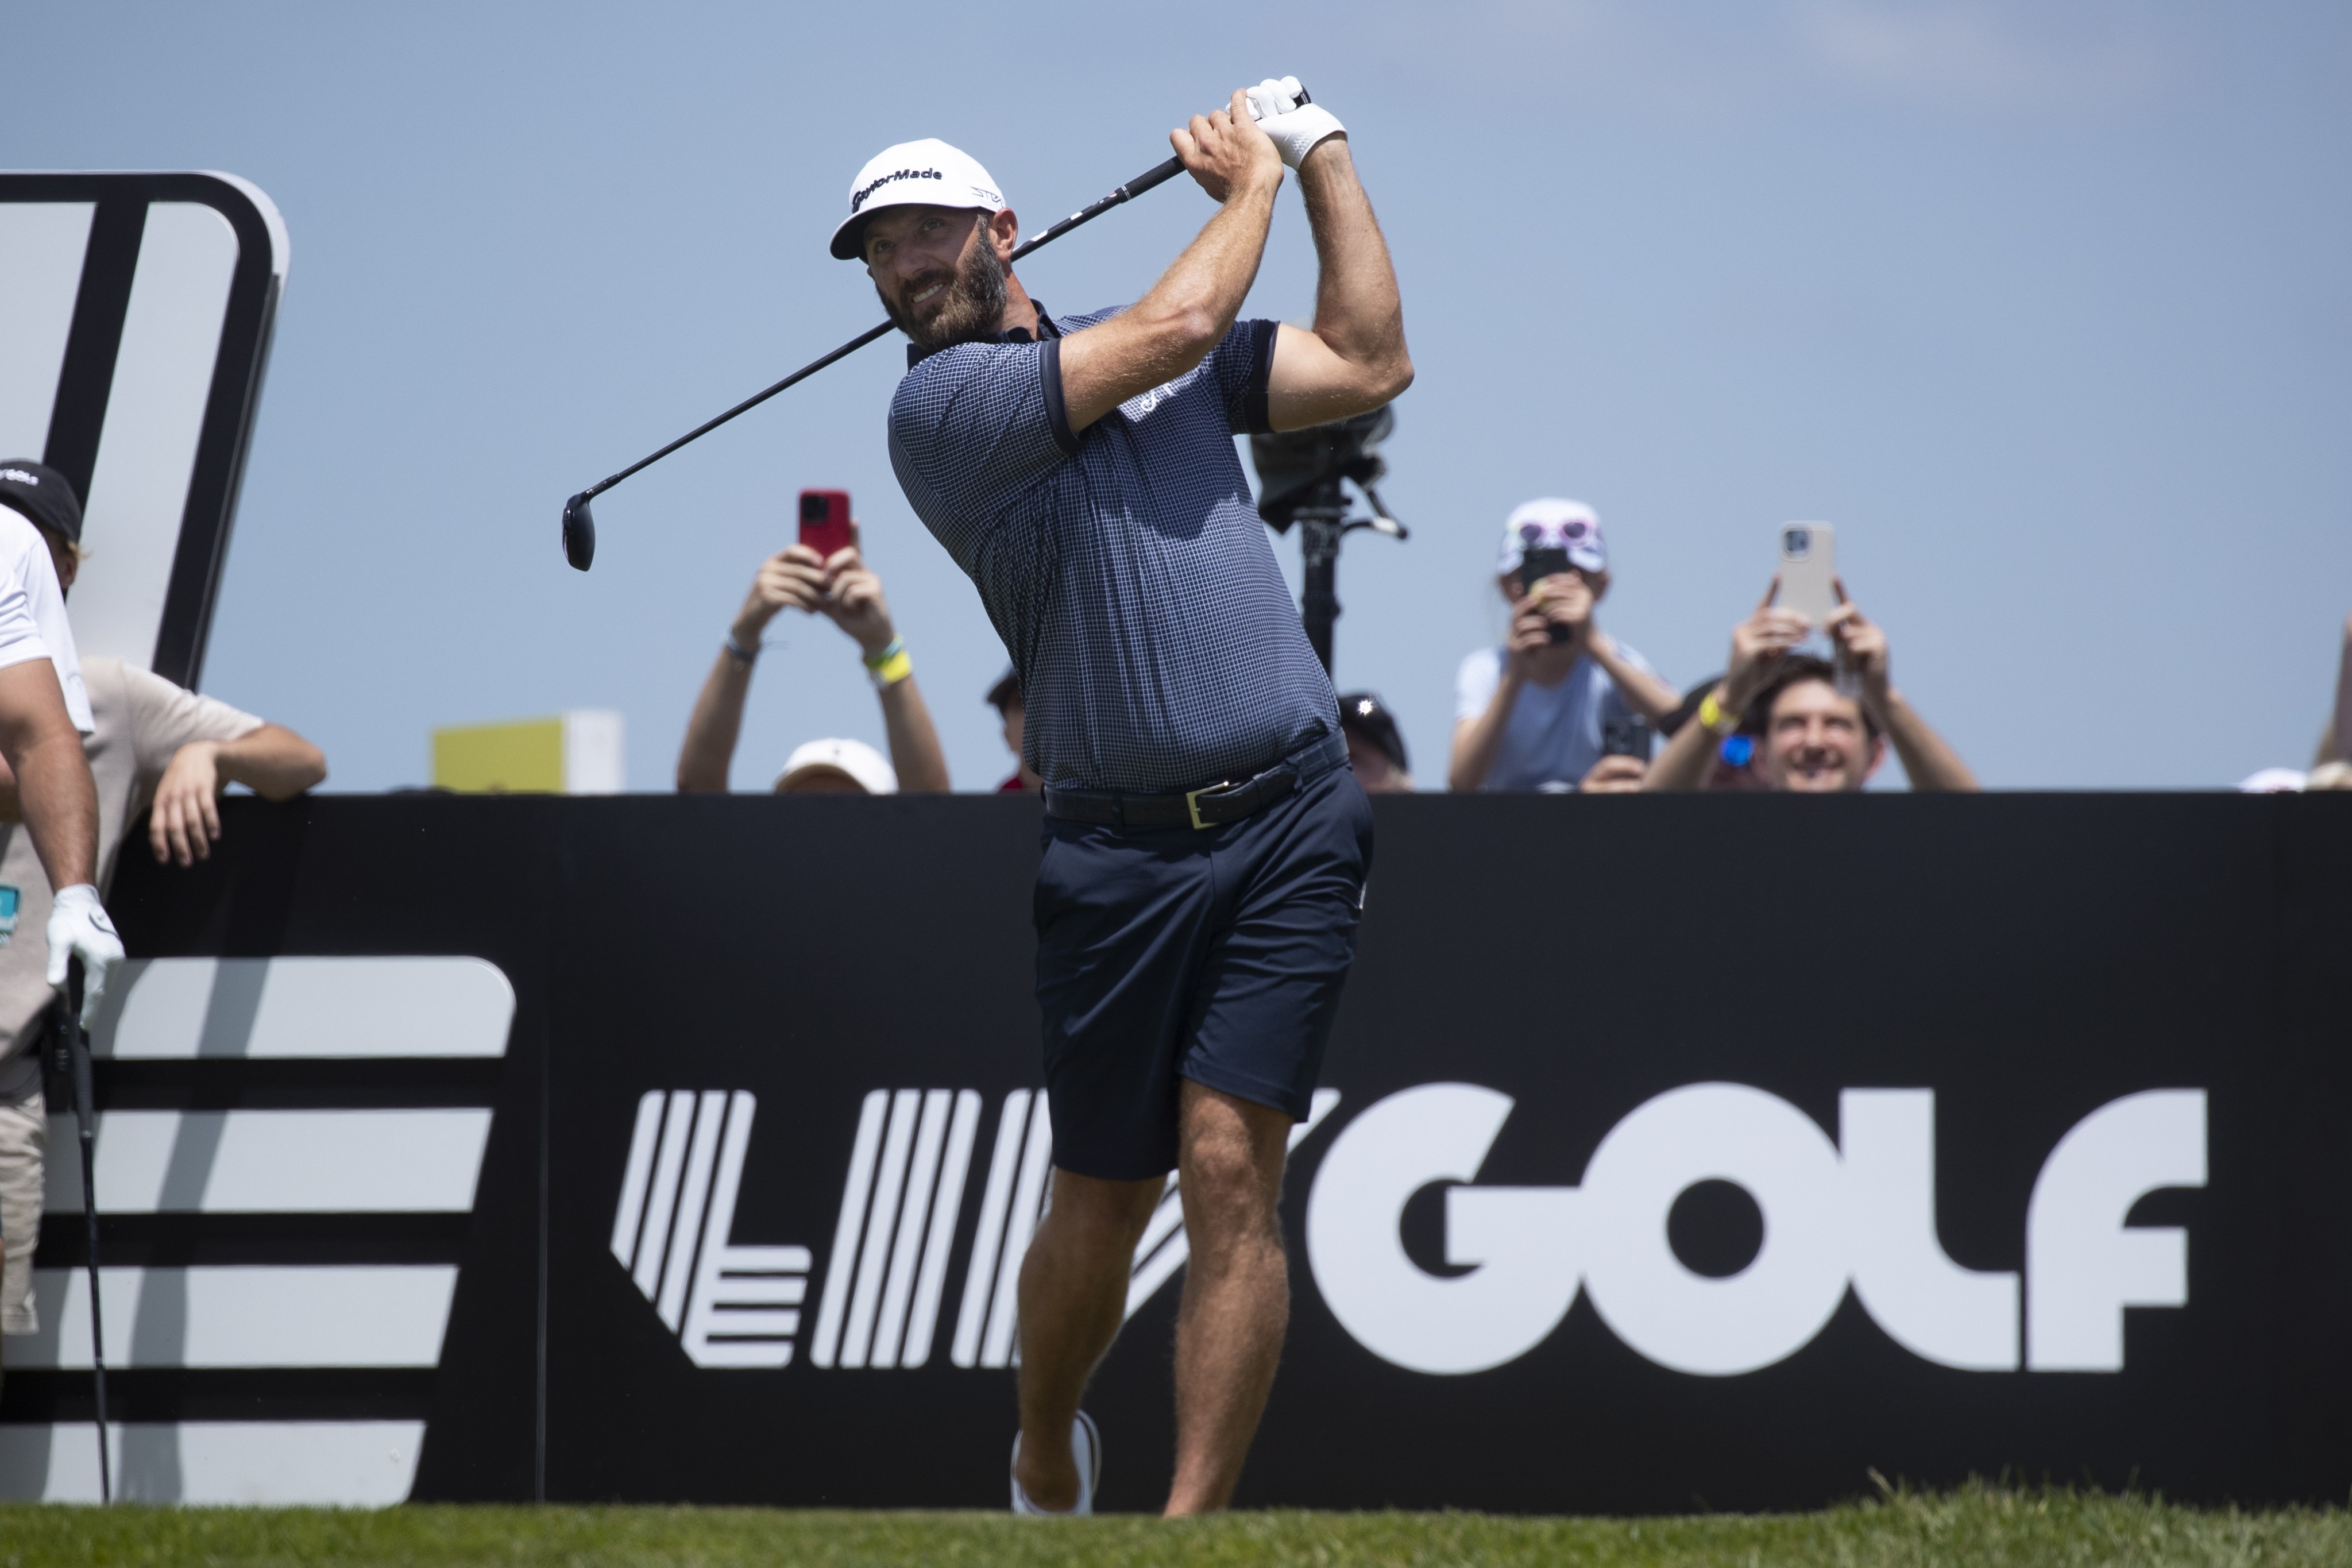 LIV Golf had offered lucrative deals to lure players such as Dustin Johnson from the PGA Tour. Photo: EPA-EFE